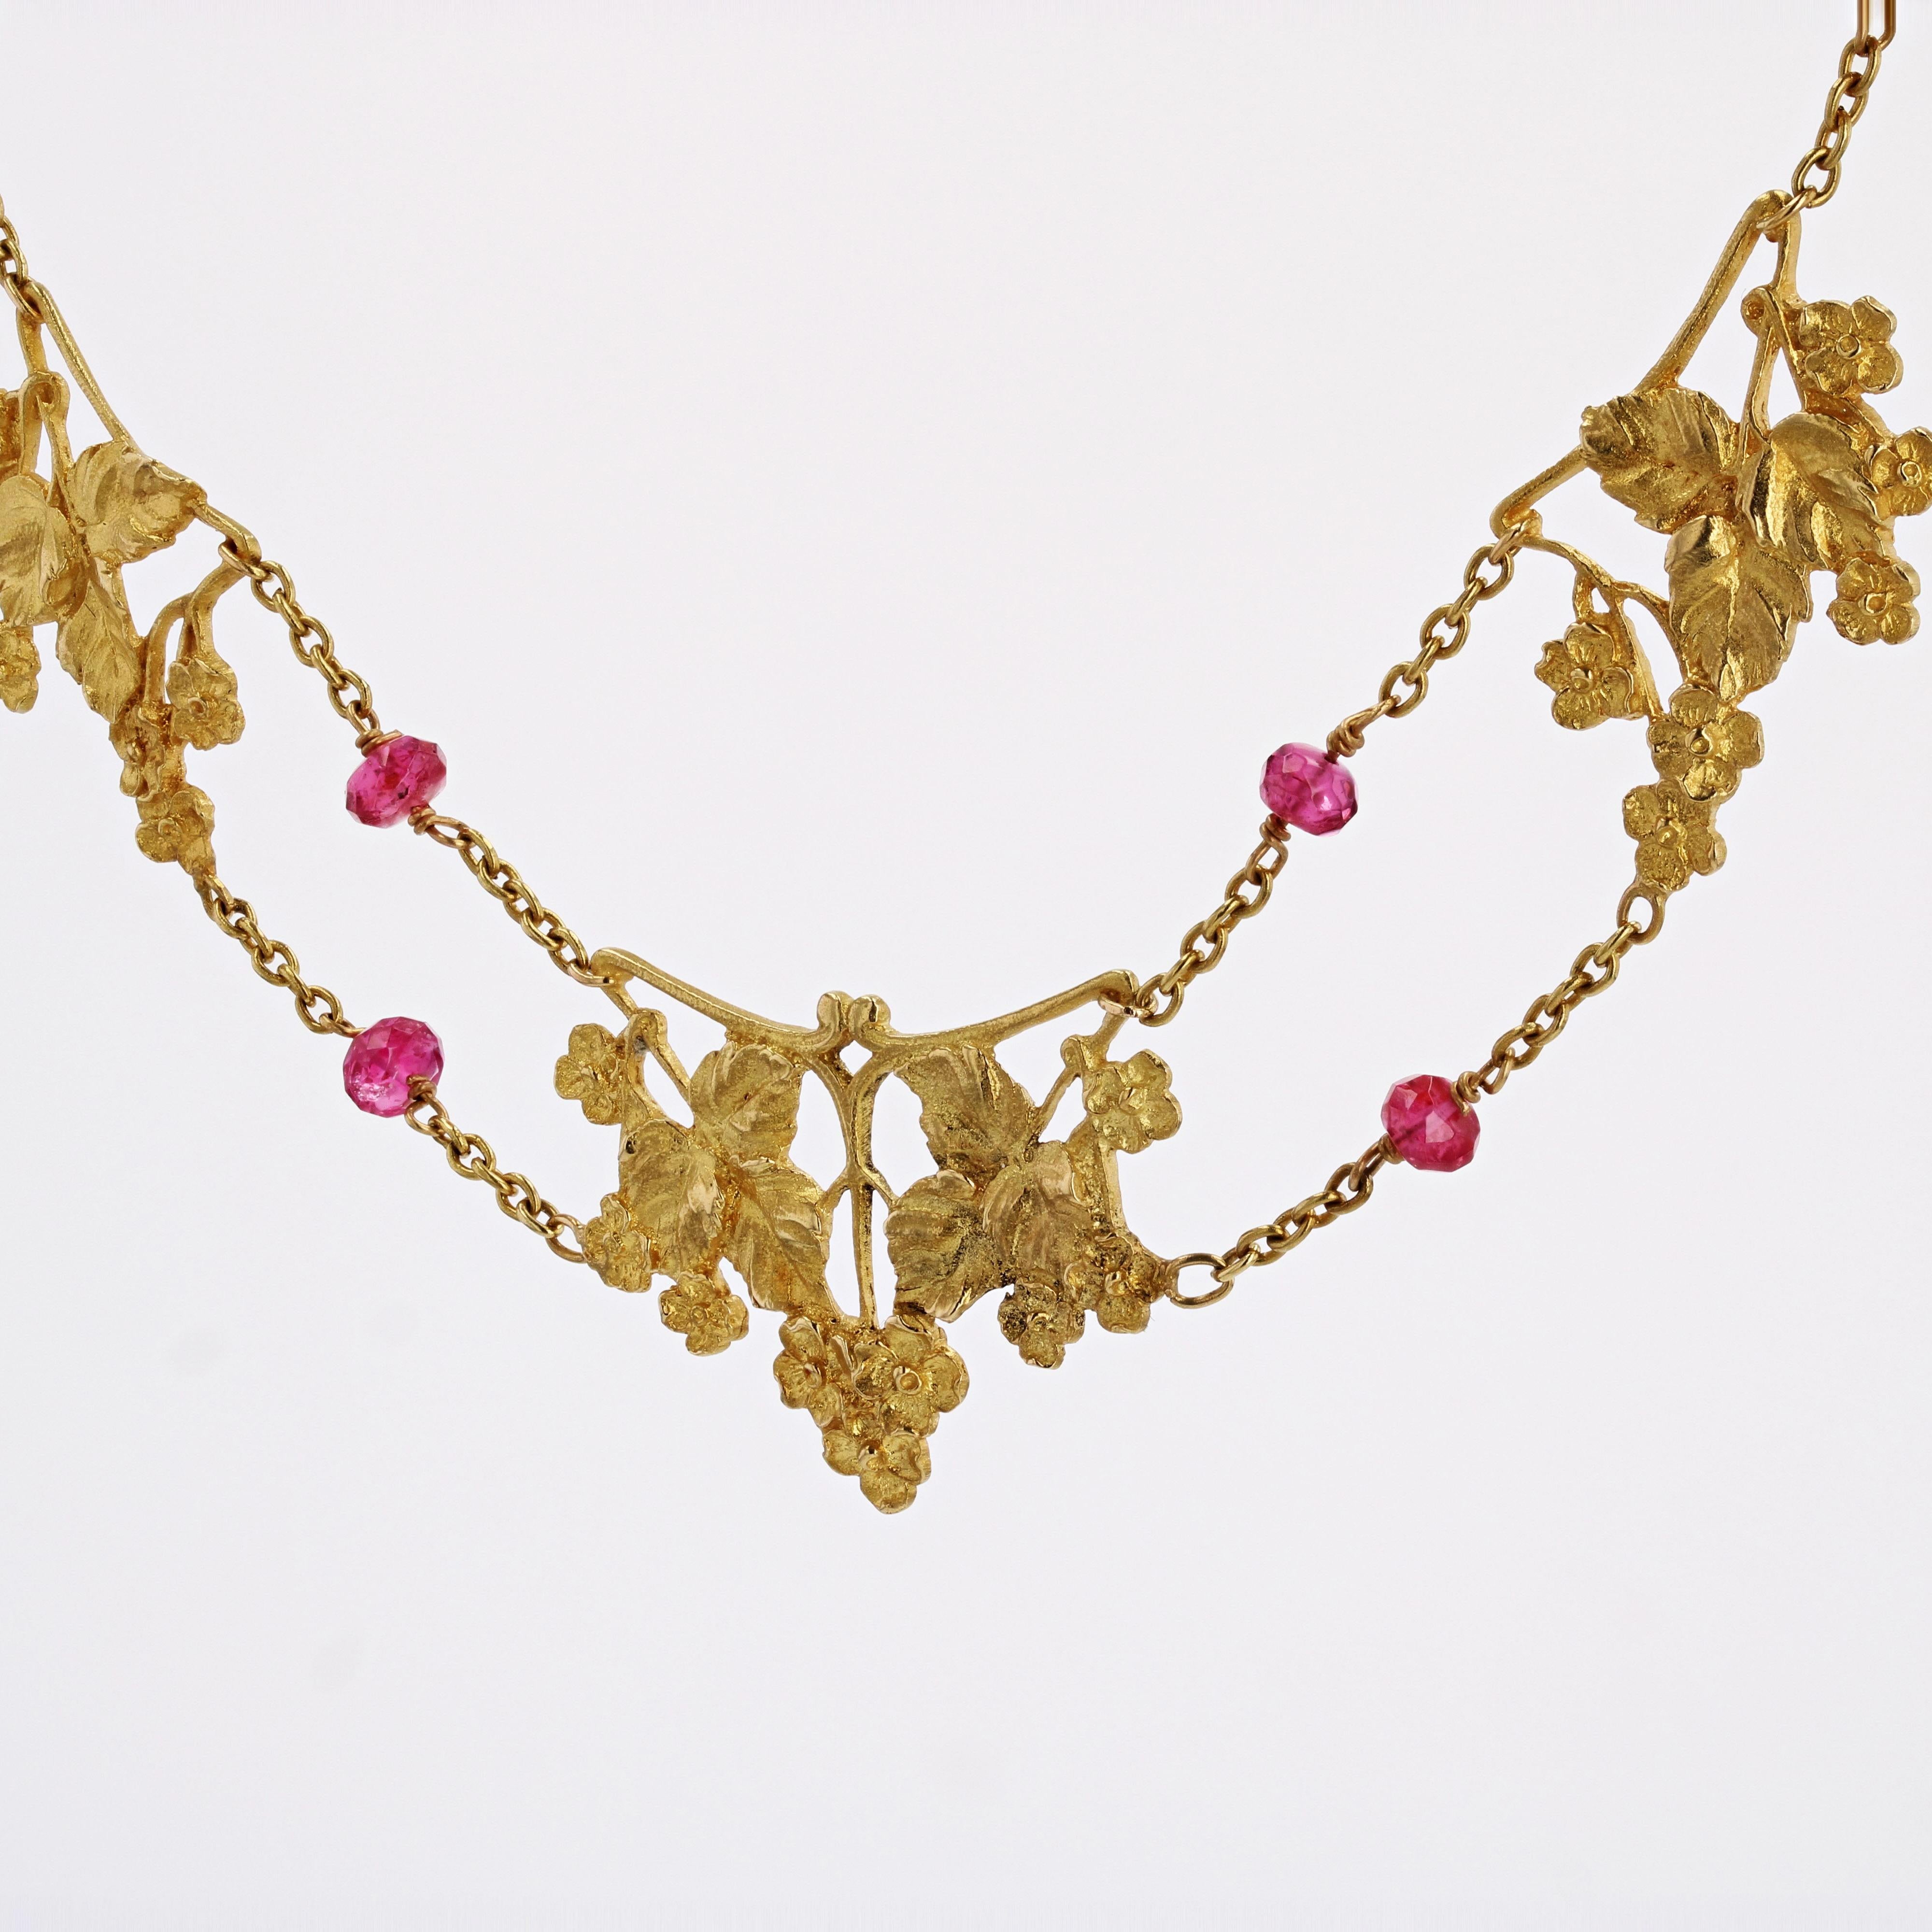 French 1950s 18 Carat Yellow Gold Pink Spinel Beads Drapery Necklace For Sale 3